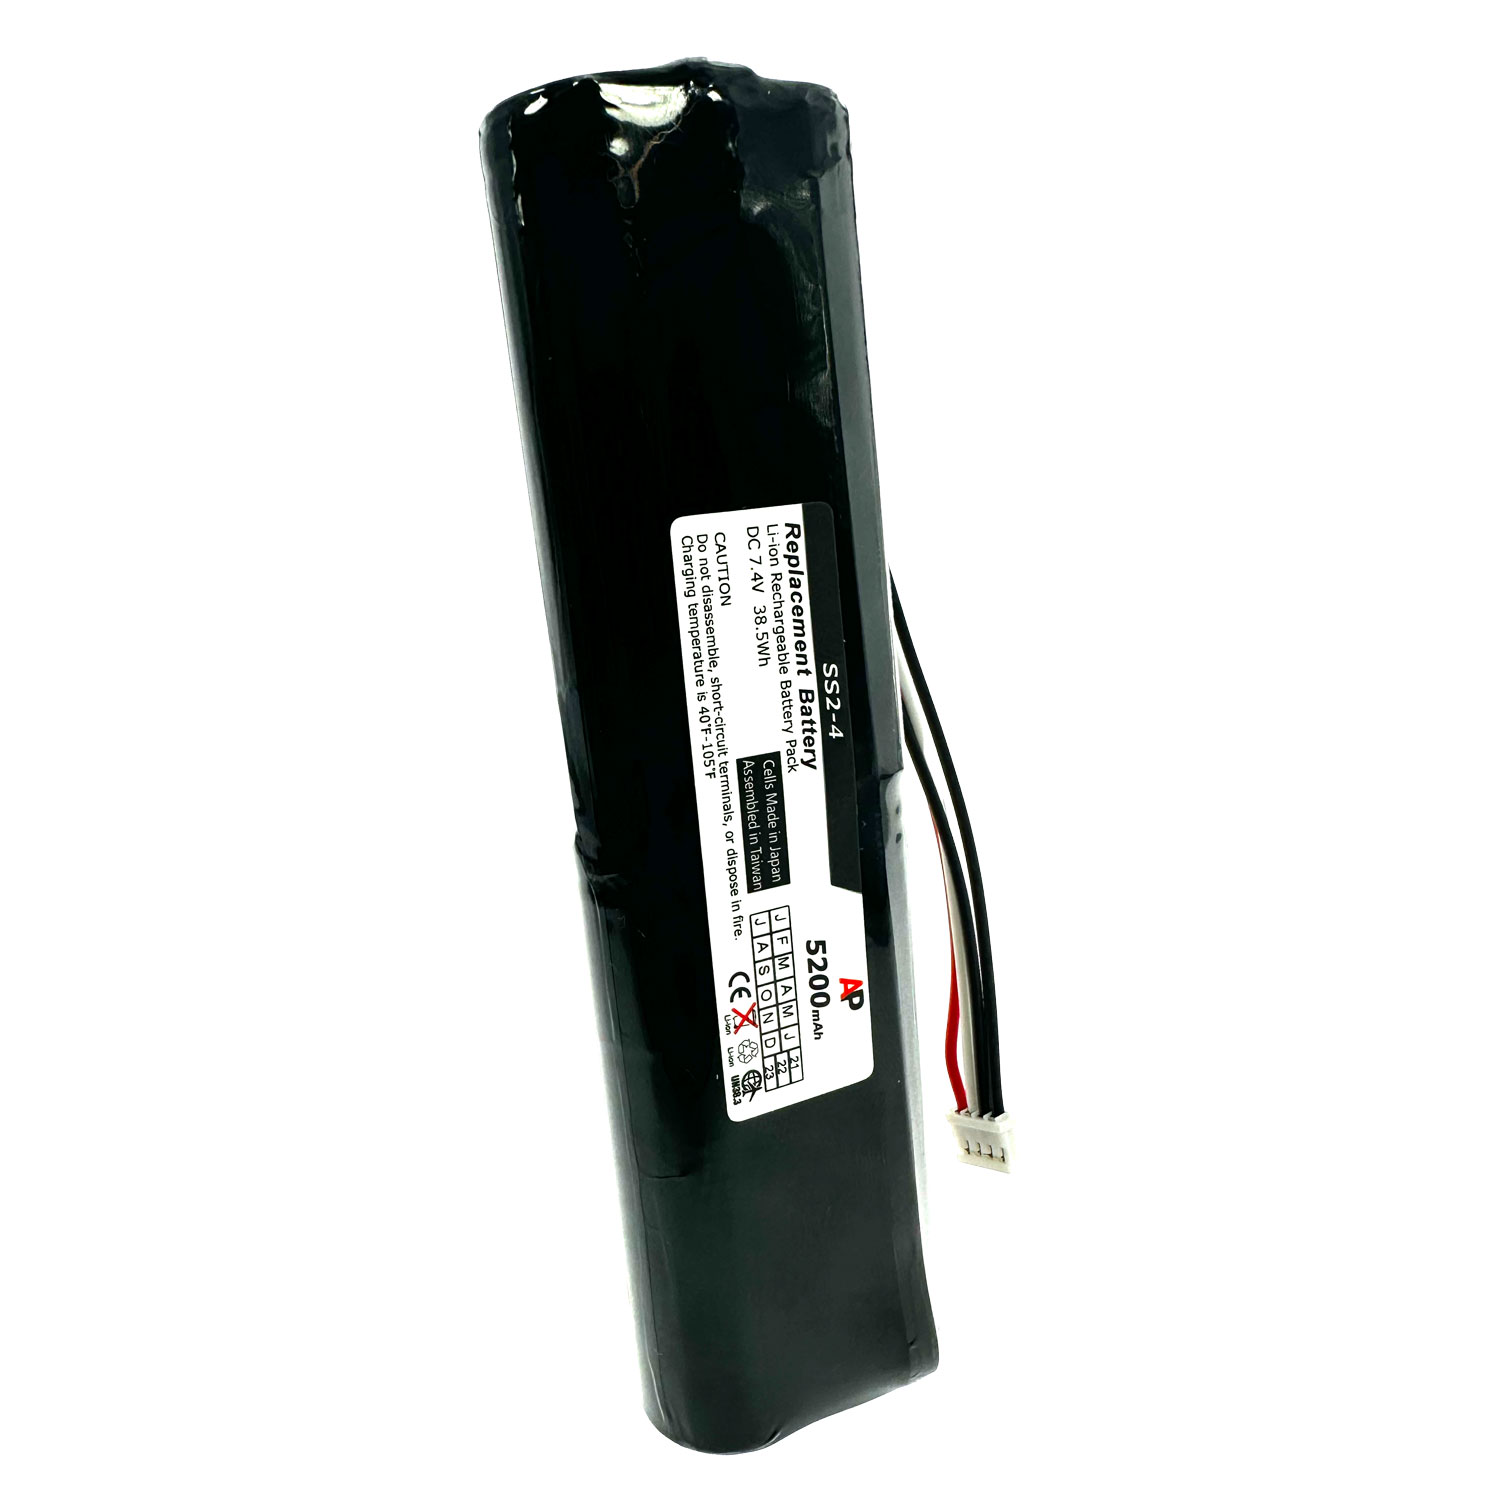 Replacement Battery for Polycom SoundStation 2 and 2W.  Extended Capacity. - image 4 of 4